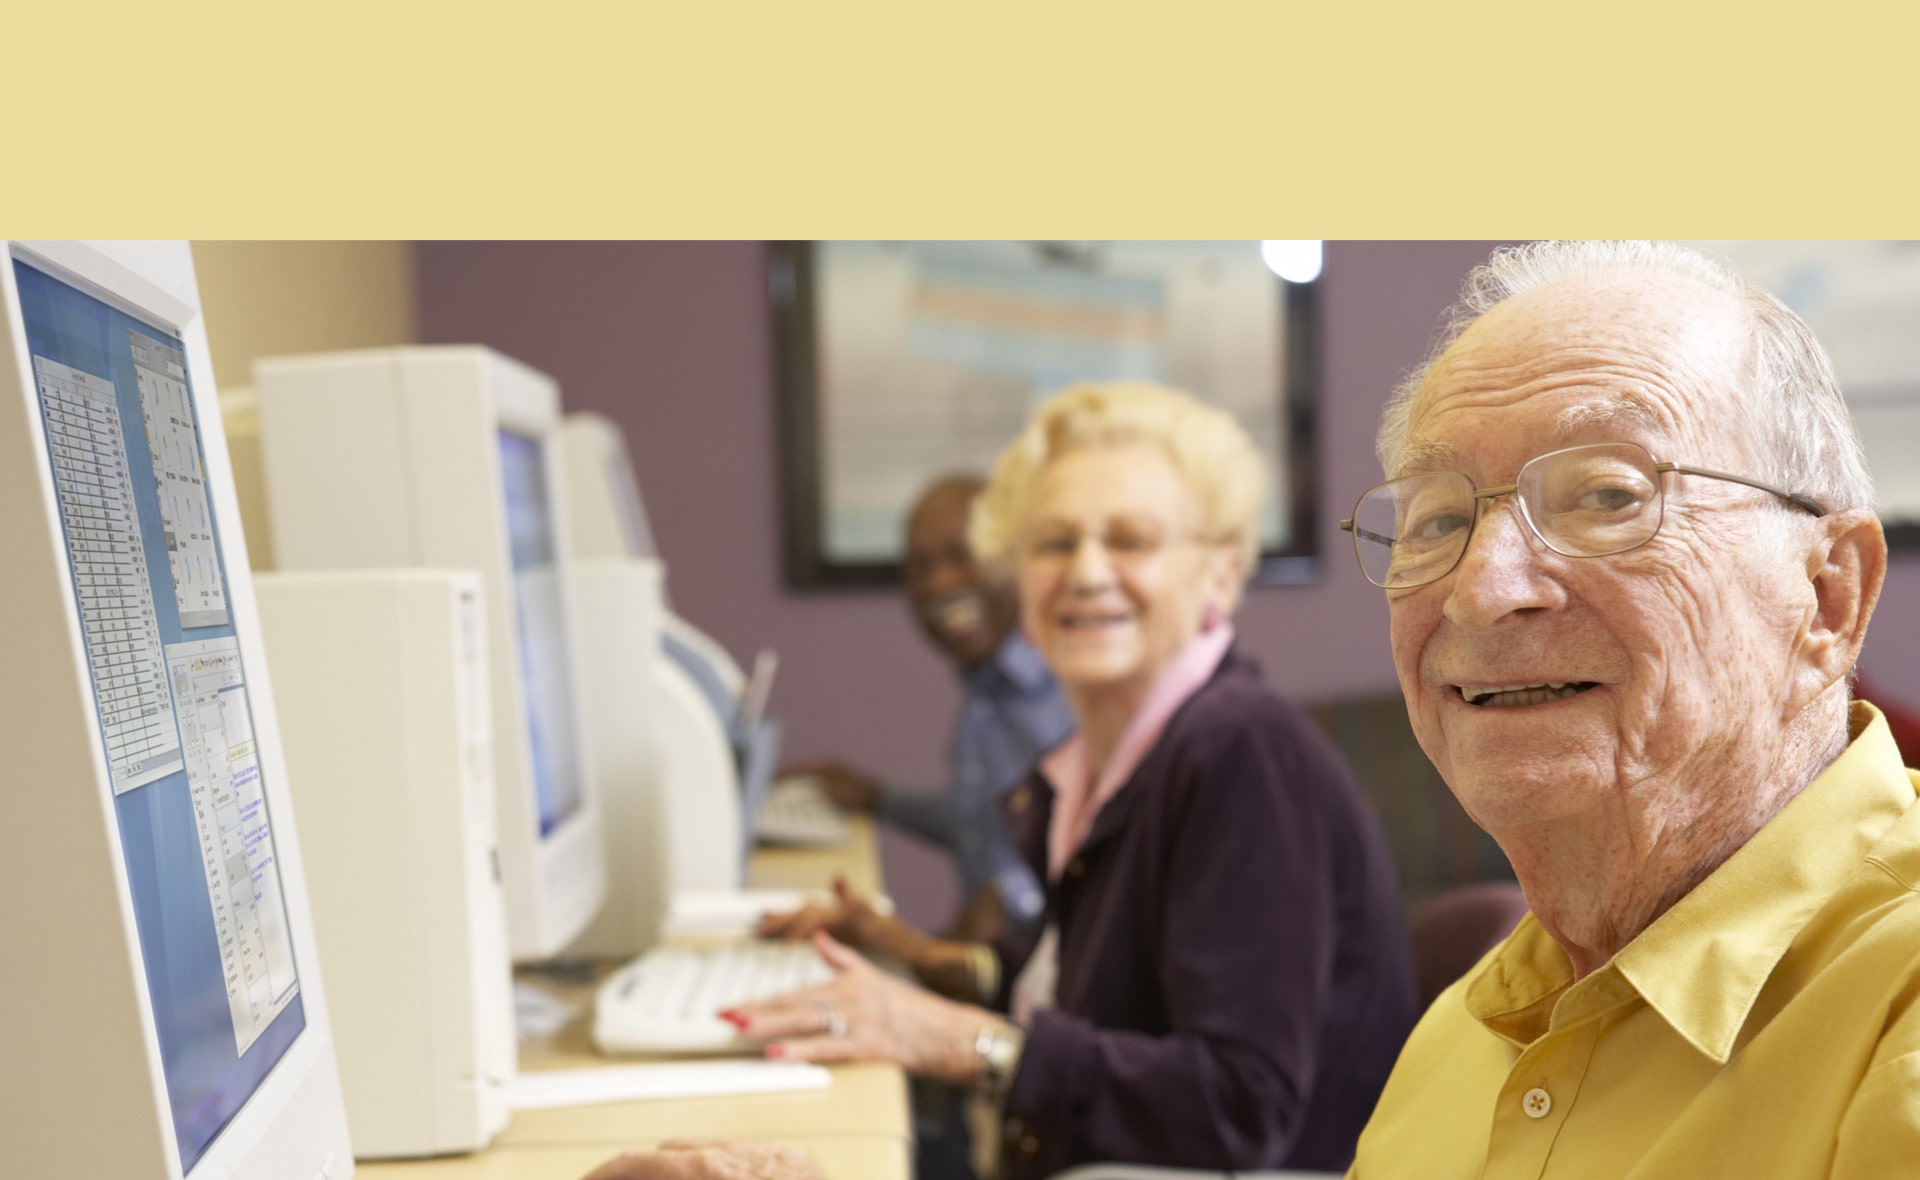 An elderly man and woman smiling in front of PCs